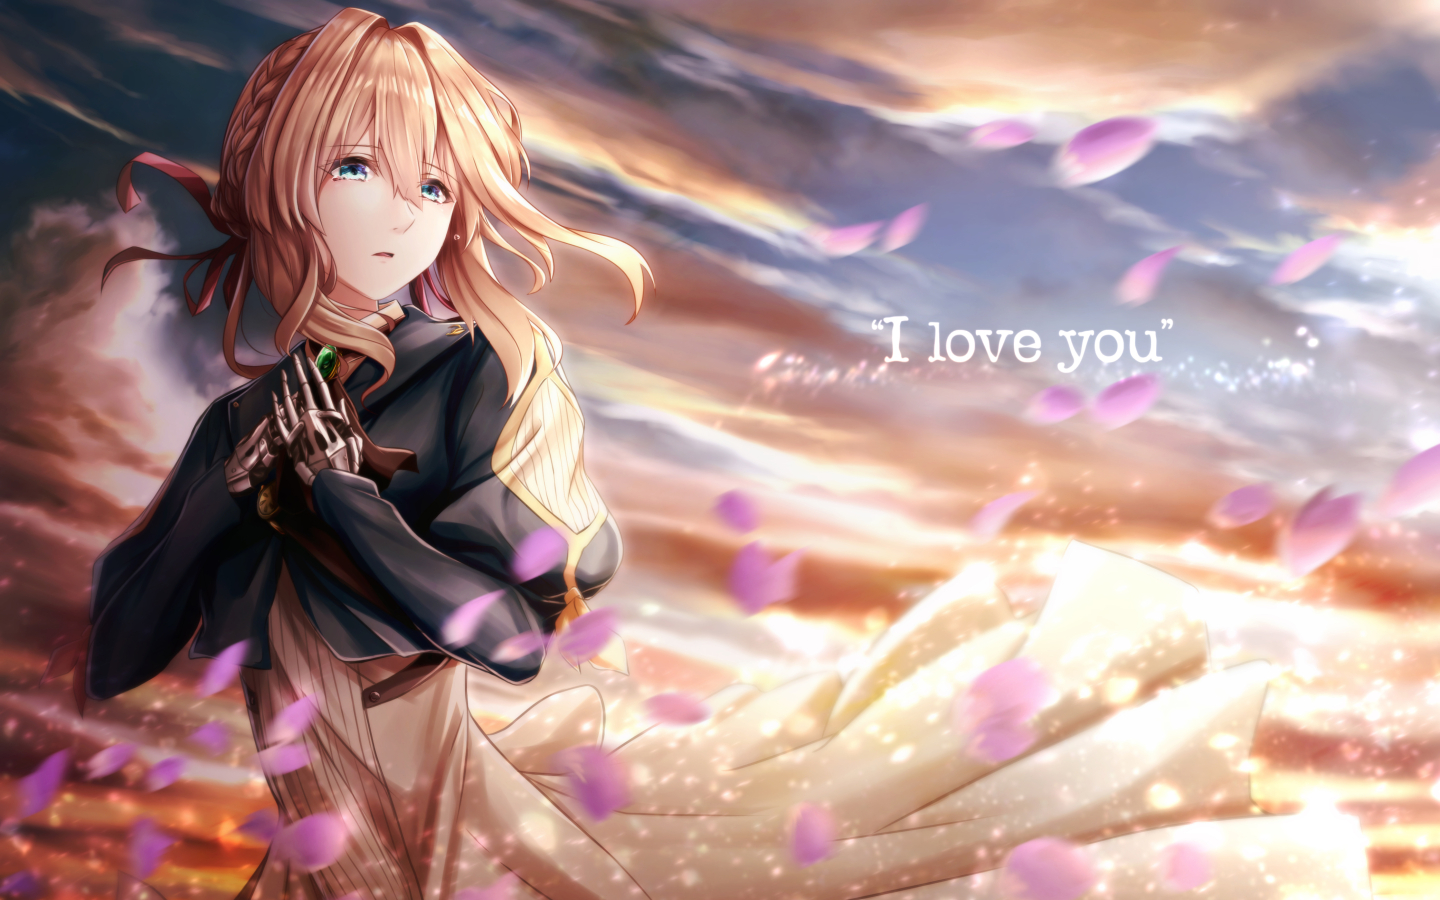 1440x900 Violet Evergarden Anime Girl 1440x900 Wallpaper Hd Anime 4k Wallpapers Images Photos And Background Wallpapers Den